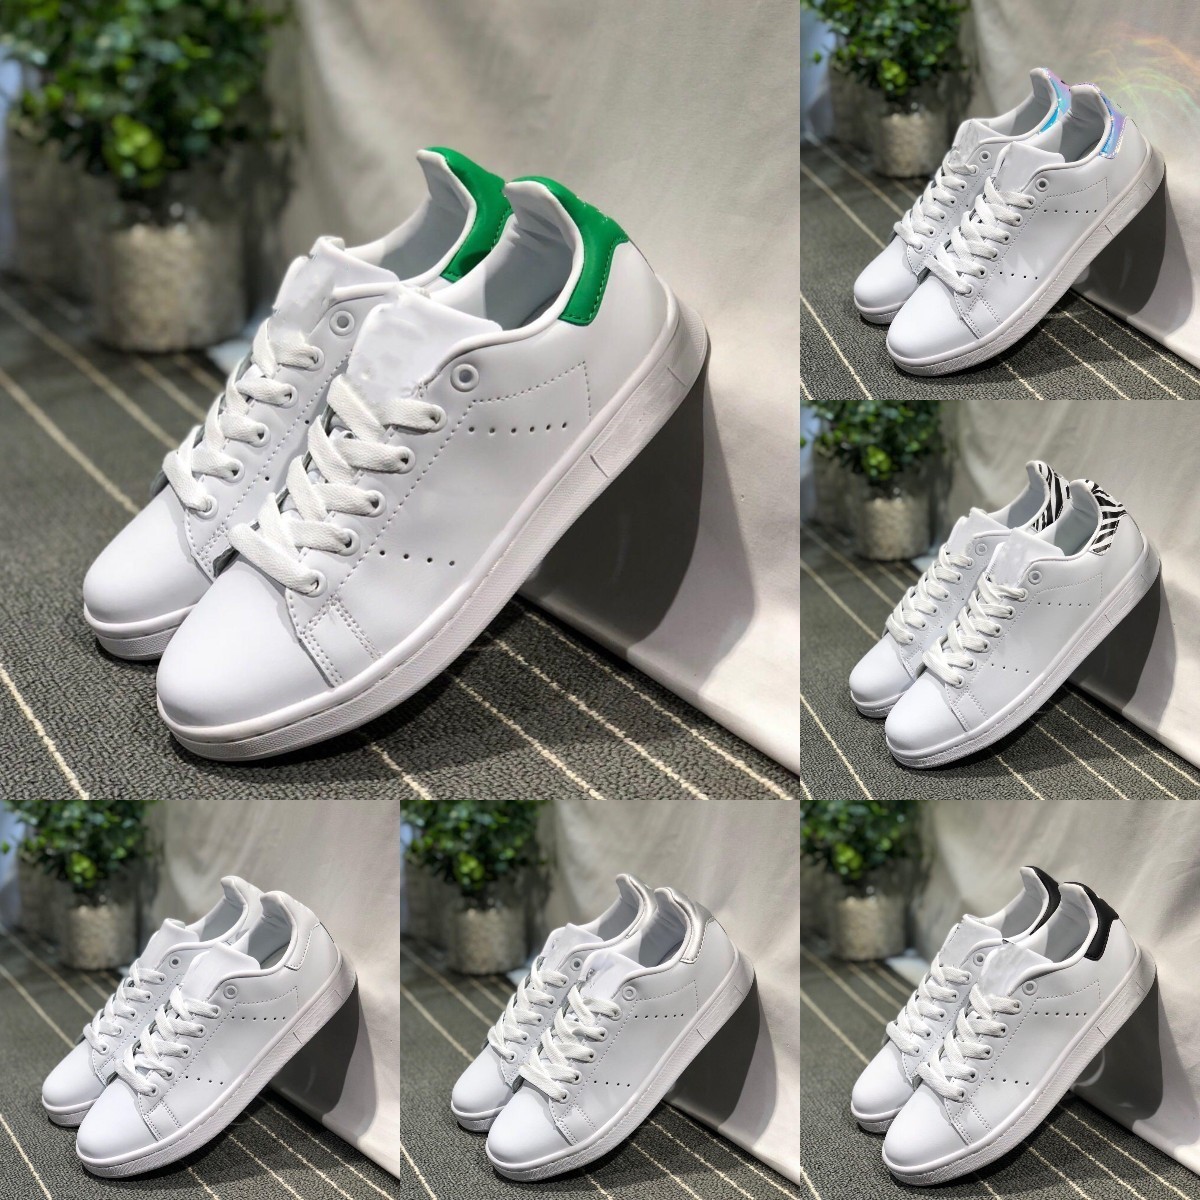 

2022 Mens Womens Free Superstar Casual Shoes Discount Designer White Black Pink Blue Gold Superstars 80s Pride Sneakers Super Star Women Men Sport Sneakers, Please contact us